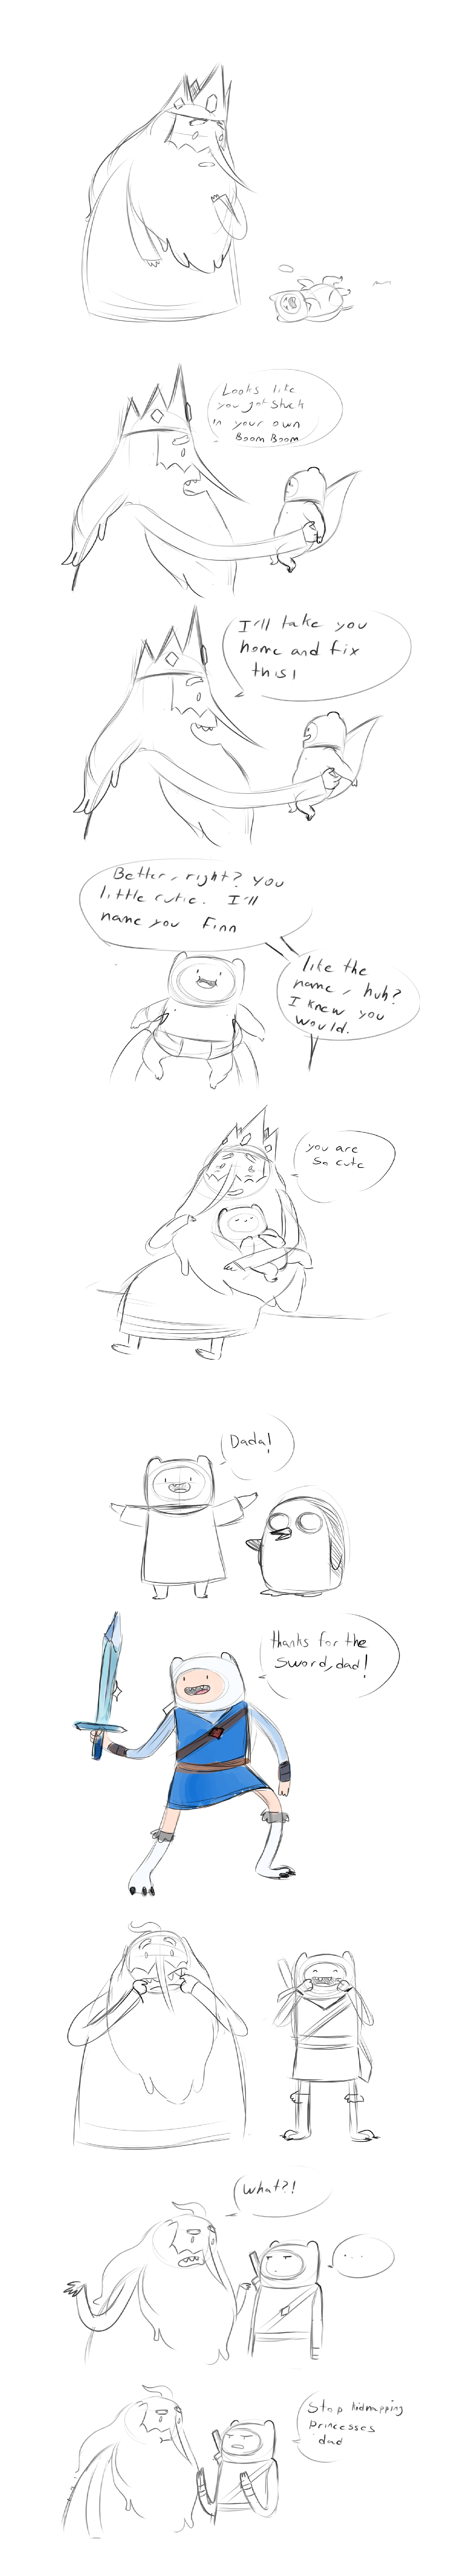 Adventure Time AU. All credit goes to: A cute short comic on what would happen if Ice King found Finn instead of Jake's parents. I've decided to stop doing comp